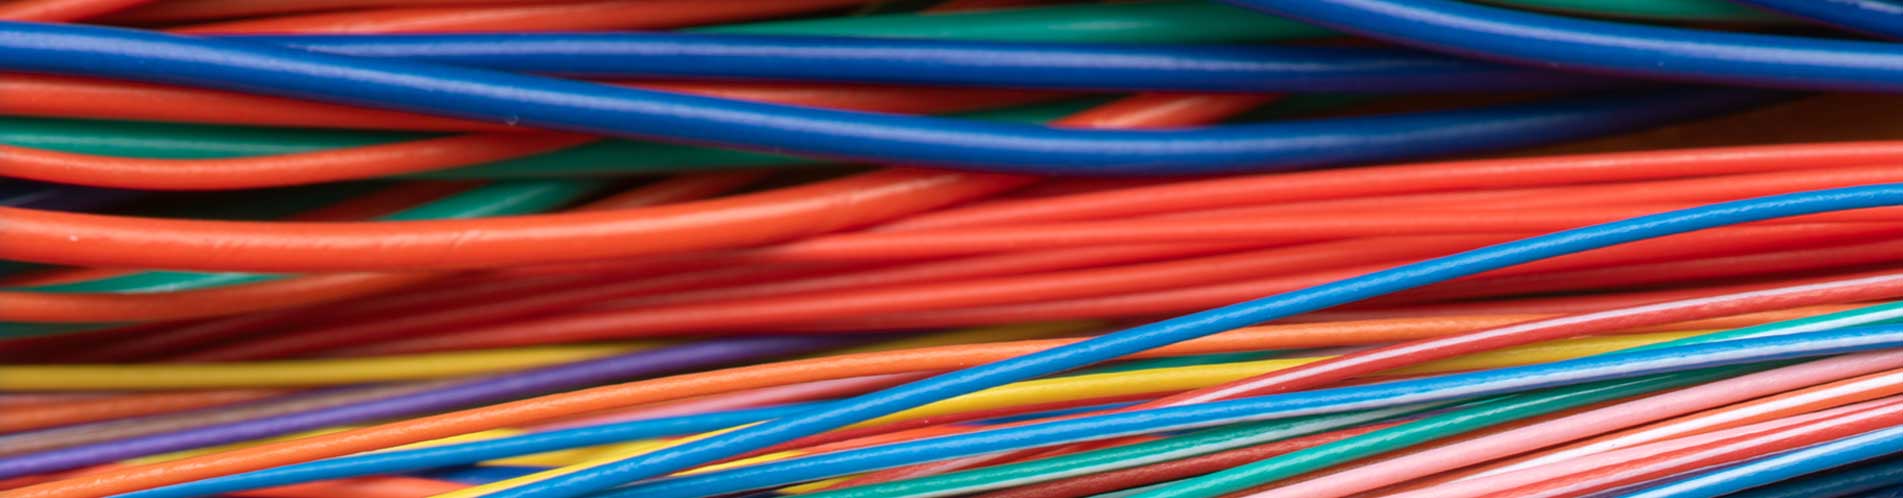 Choose from thousands of Bulk Cable options